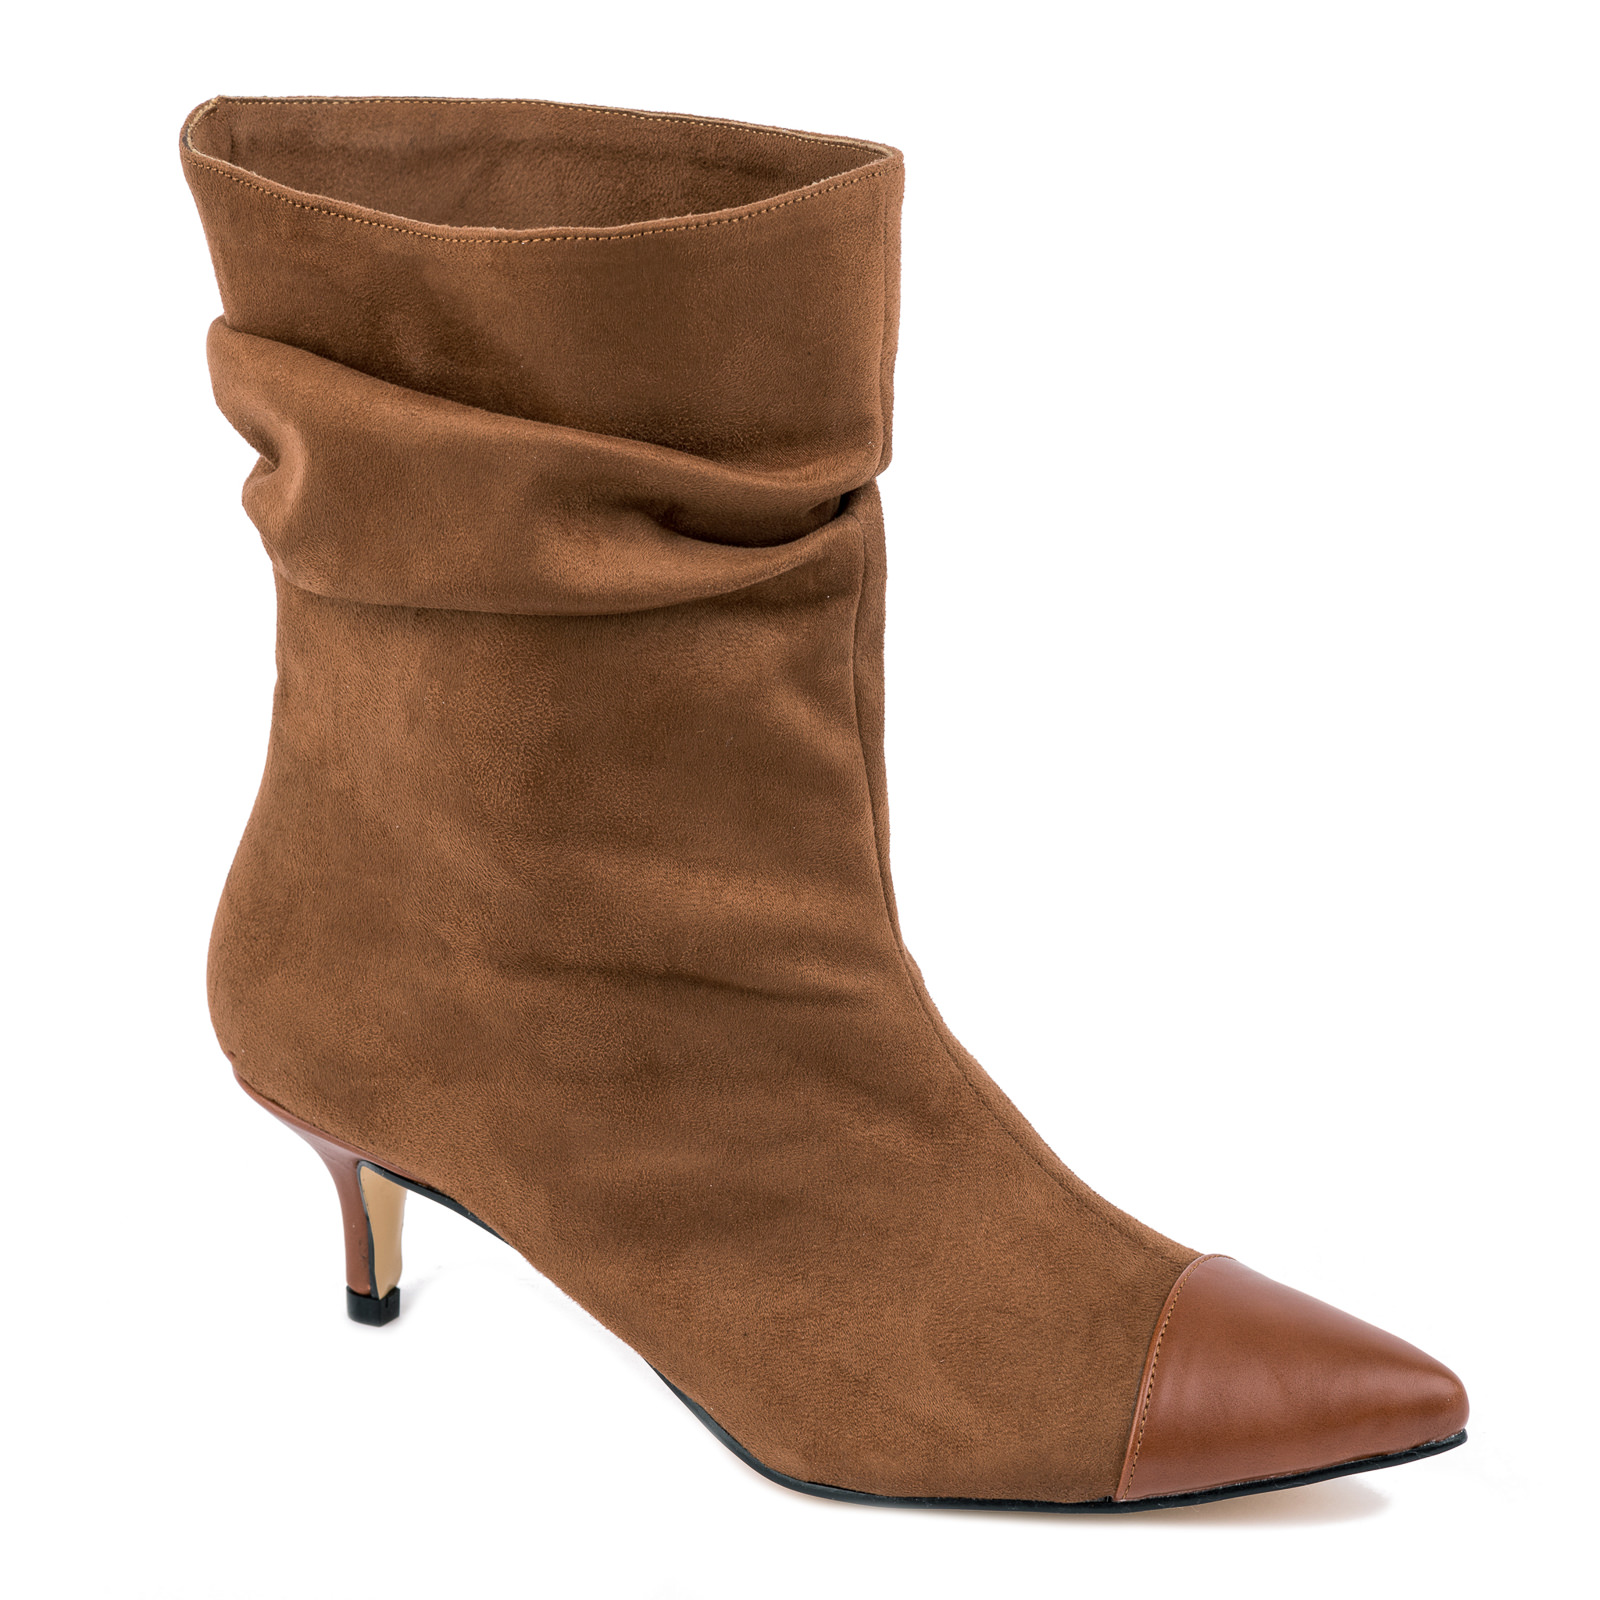 VELOUR POINTED WRINKLED ANKLE BOOTS WITH THIN HEEL - CAMEL